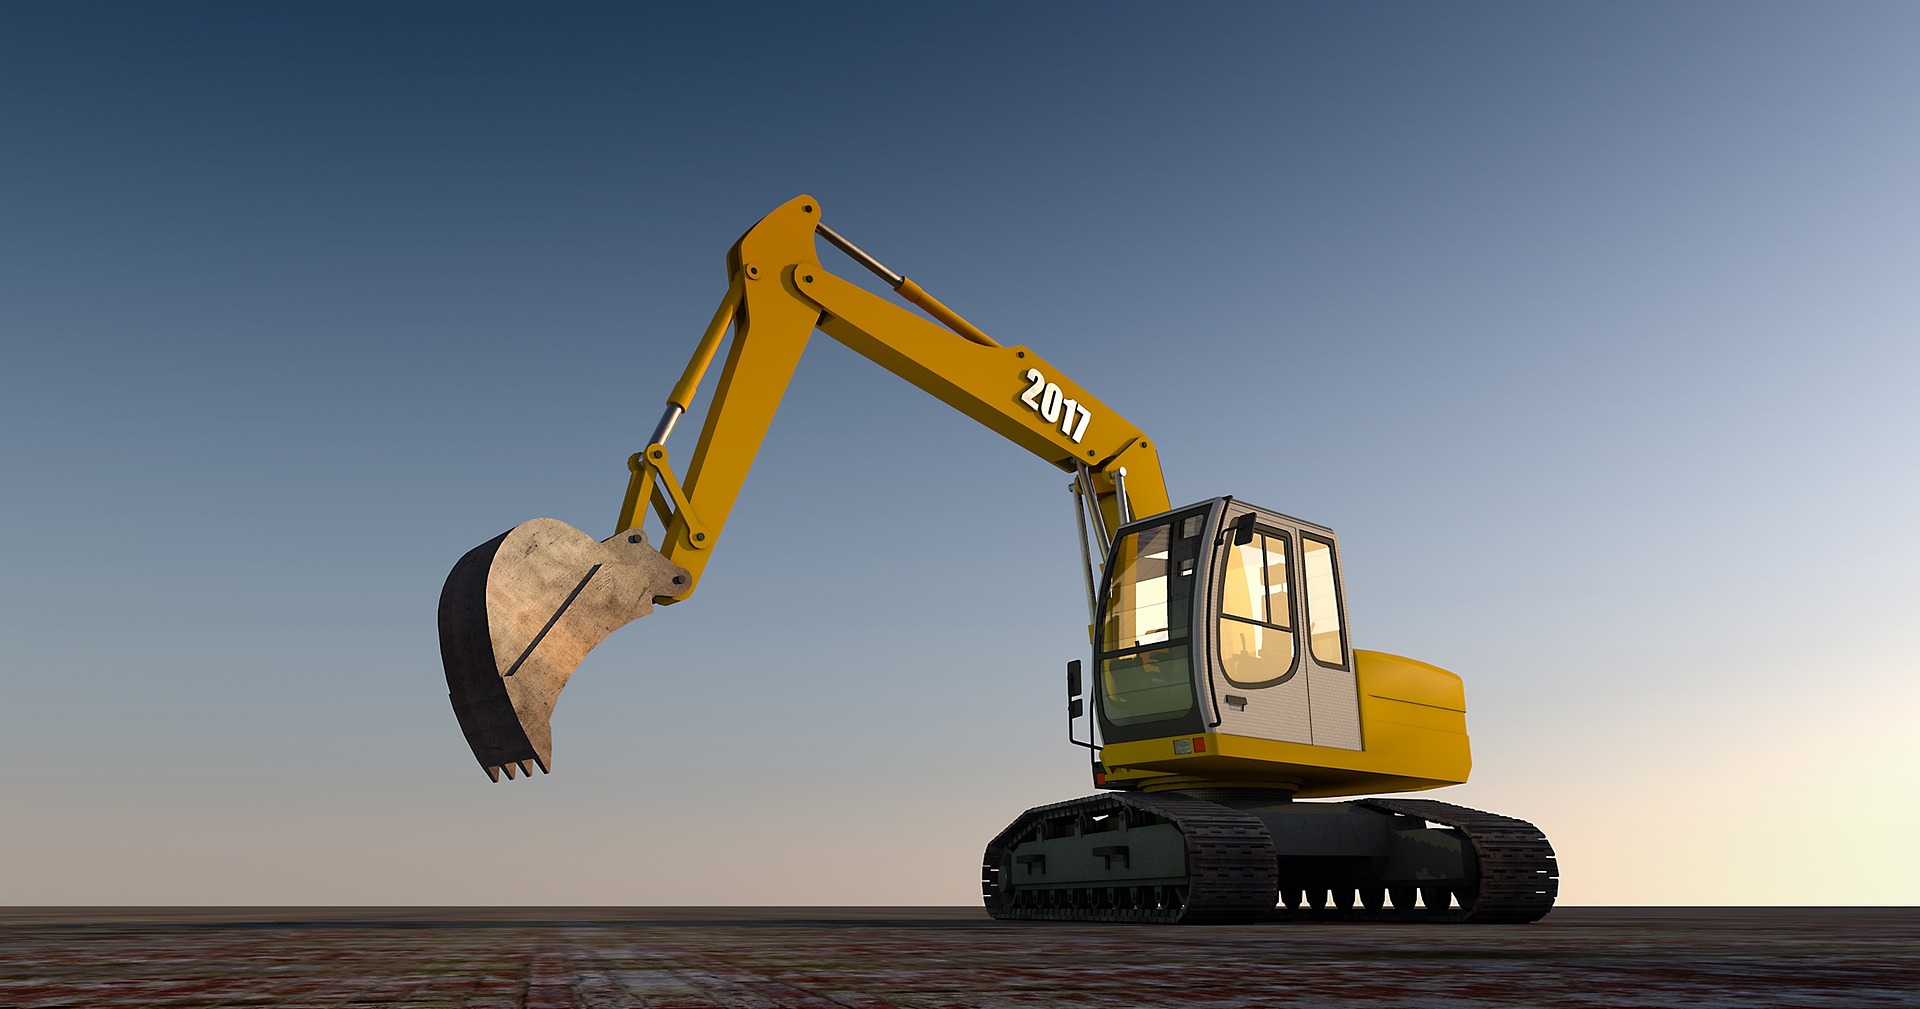 How Much Does an Excavator Cost?